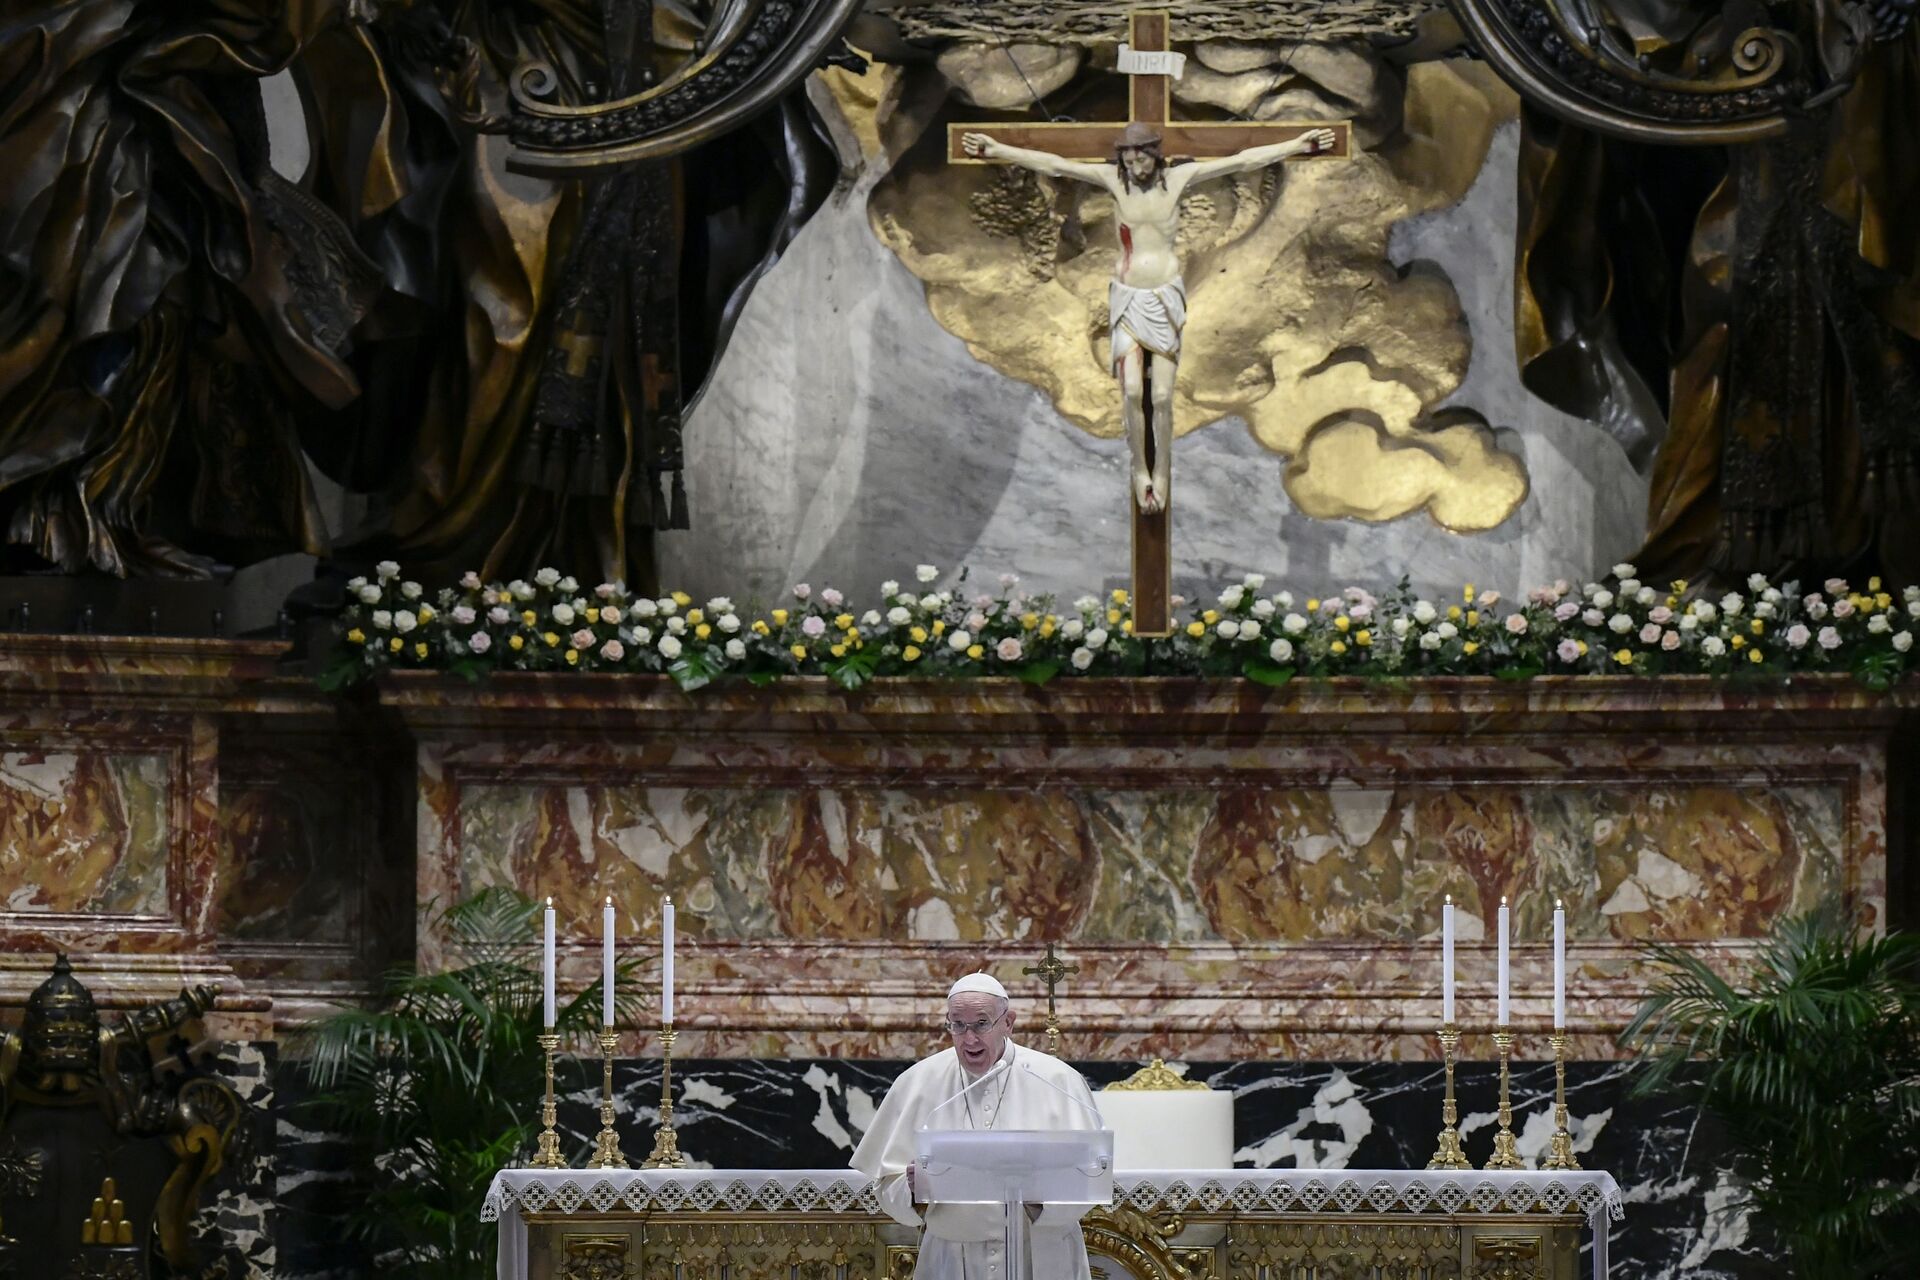 Easter Sunday Mass: Pope Denounces Raging Armed Conflicts in World as 'Scandalous' - Sputnik International, 1920, 04.04.2021